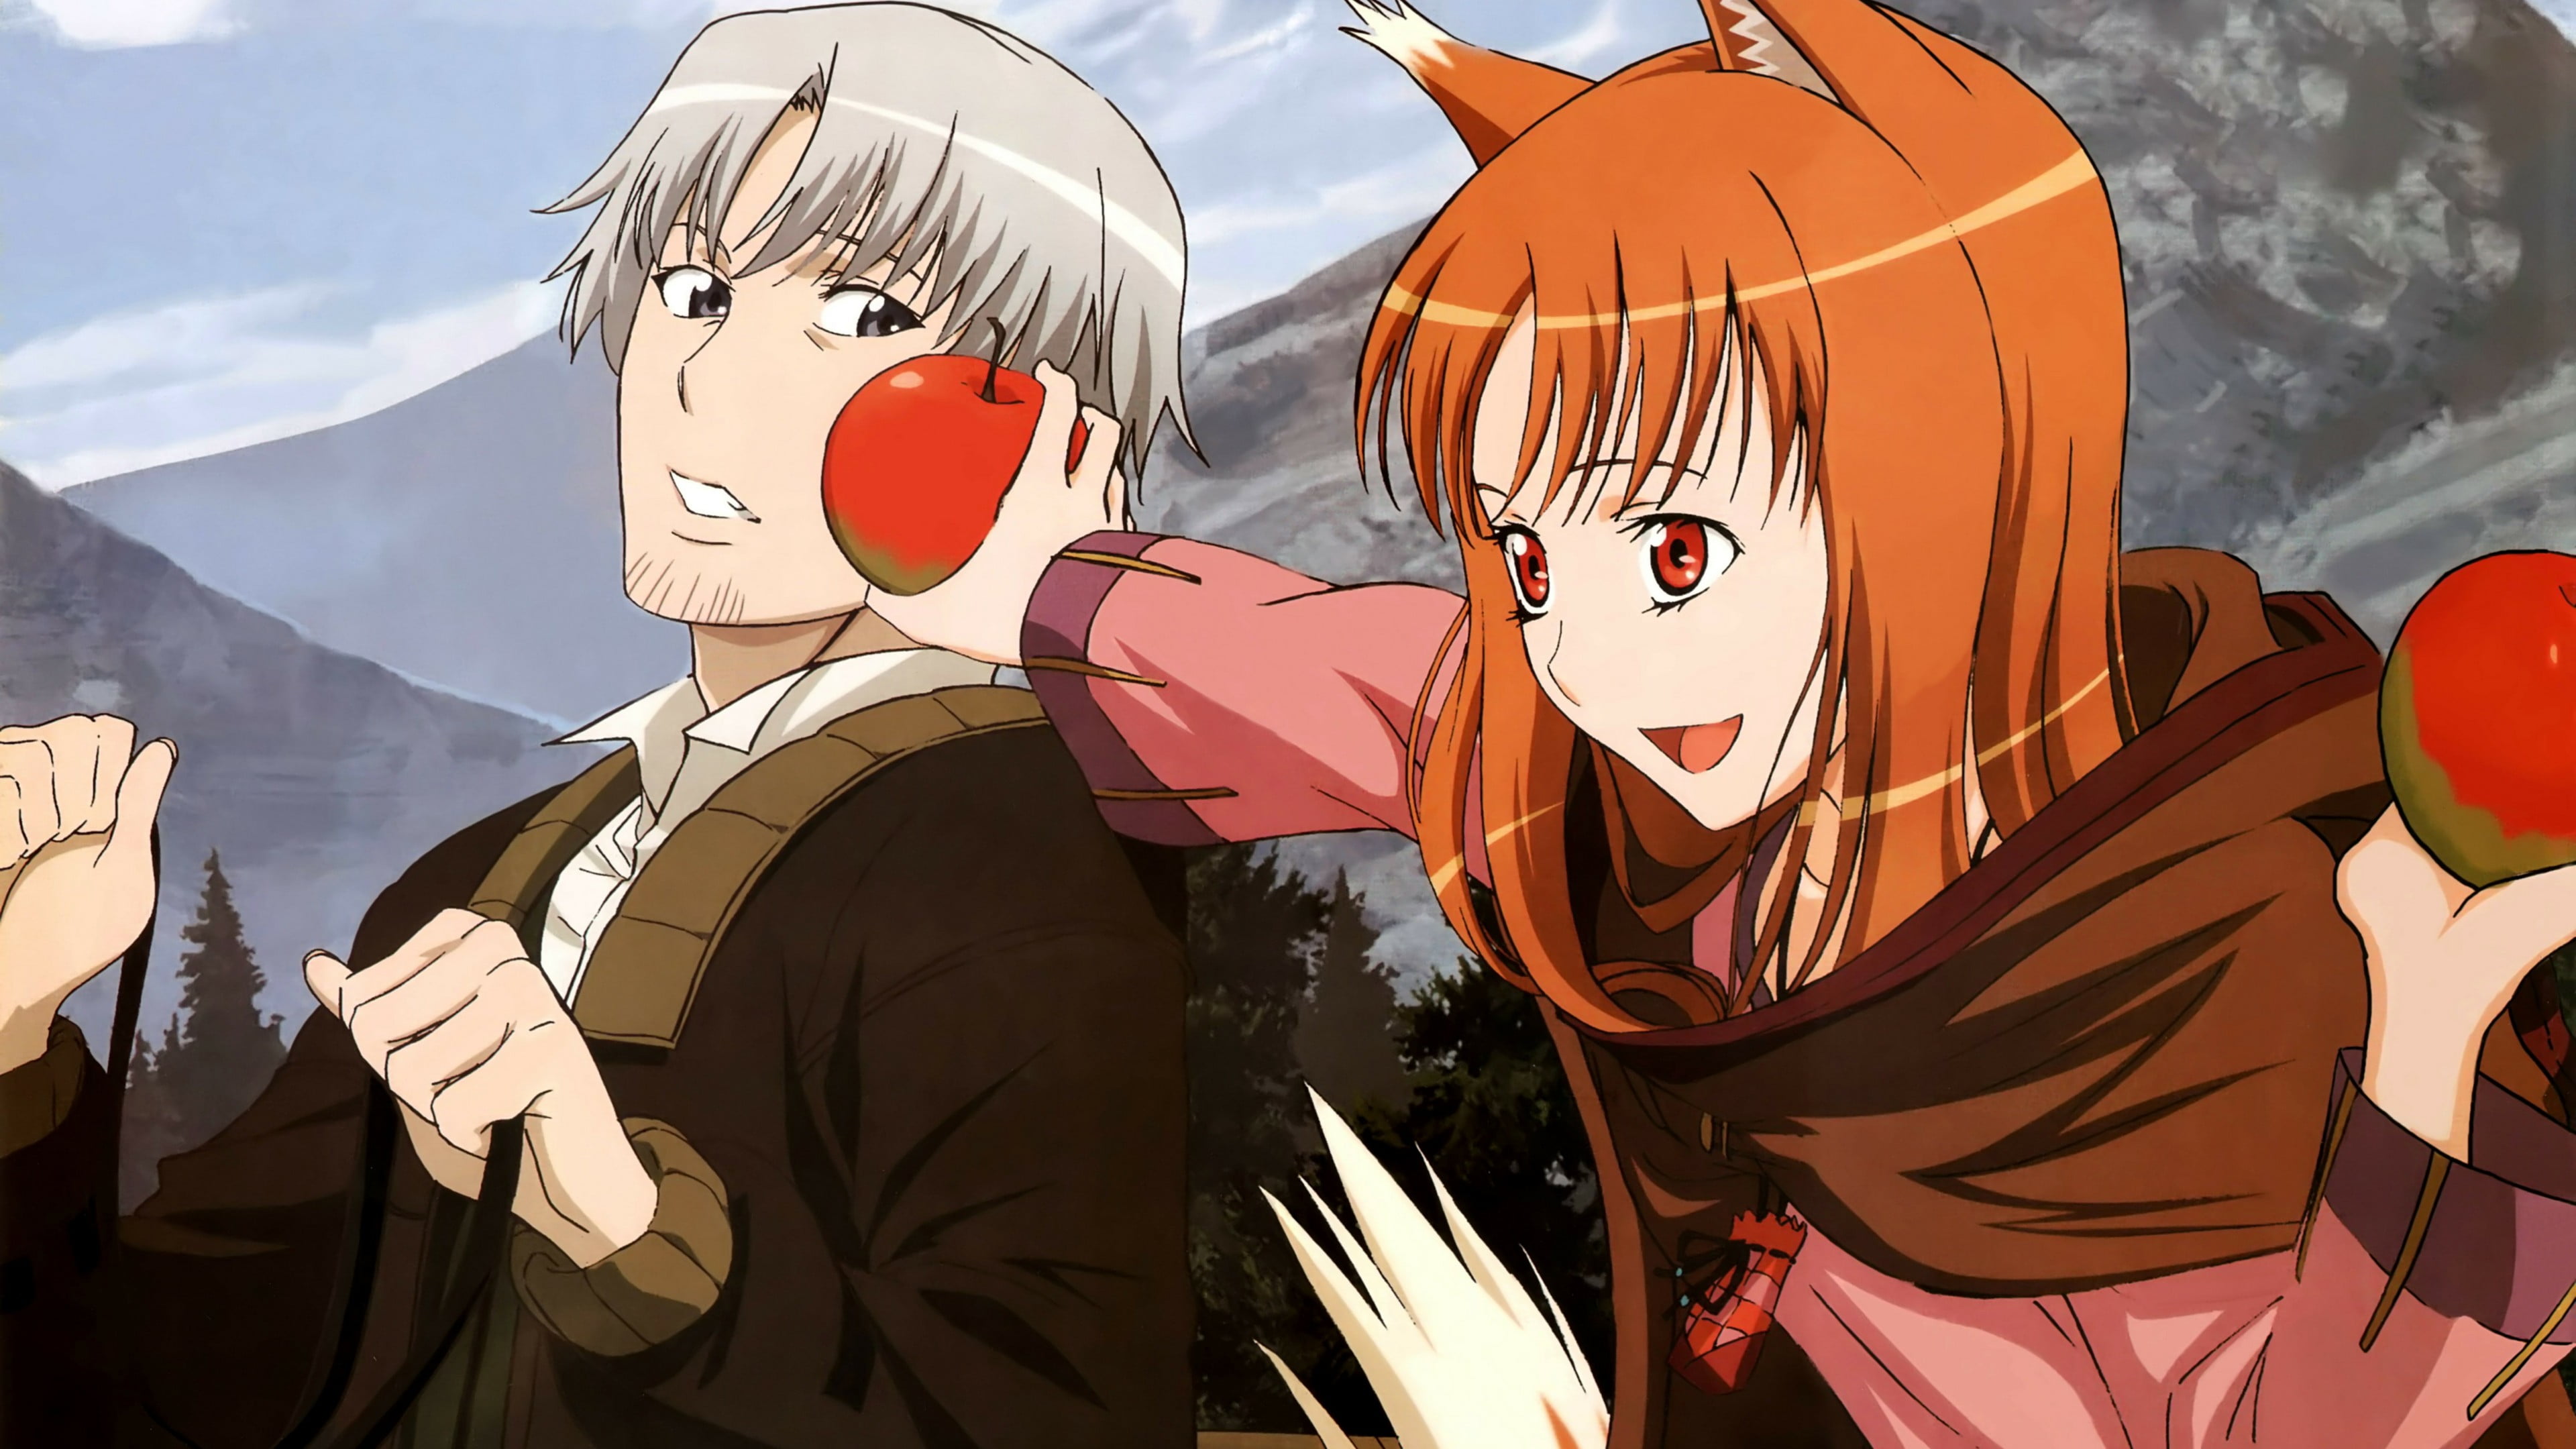 1600x1200 Resolution Two Anime Characters Anime Spice And Wolf